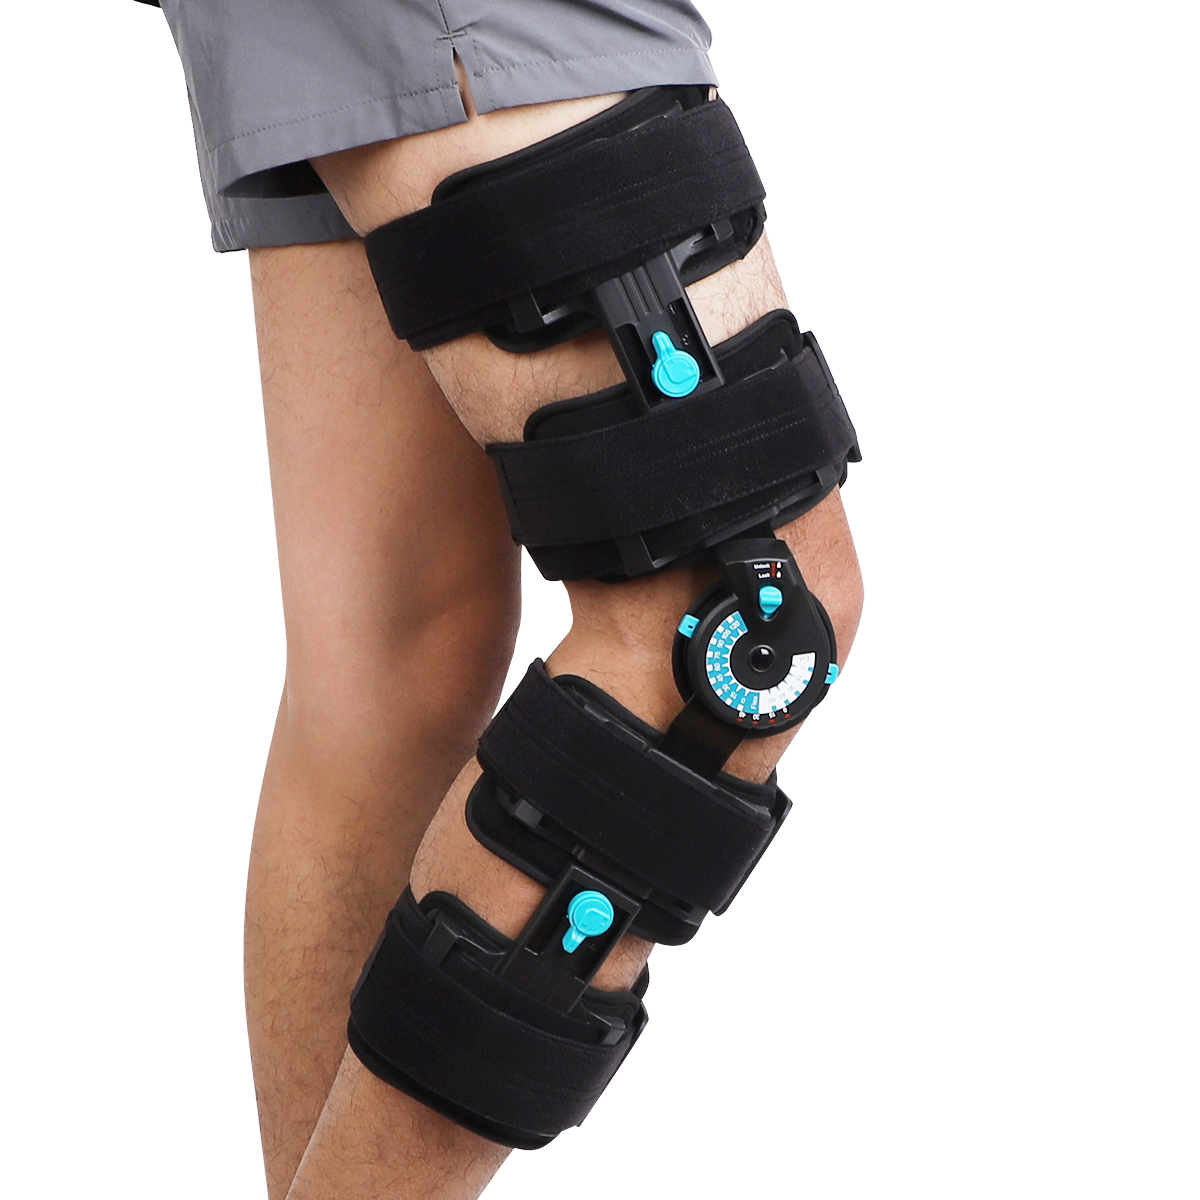 Orthomen Hinged Knee Brace Recovery Immobilization after Surgery ...